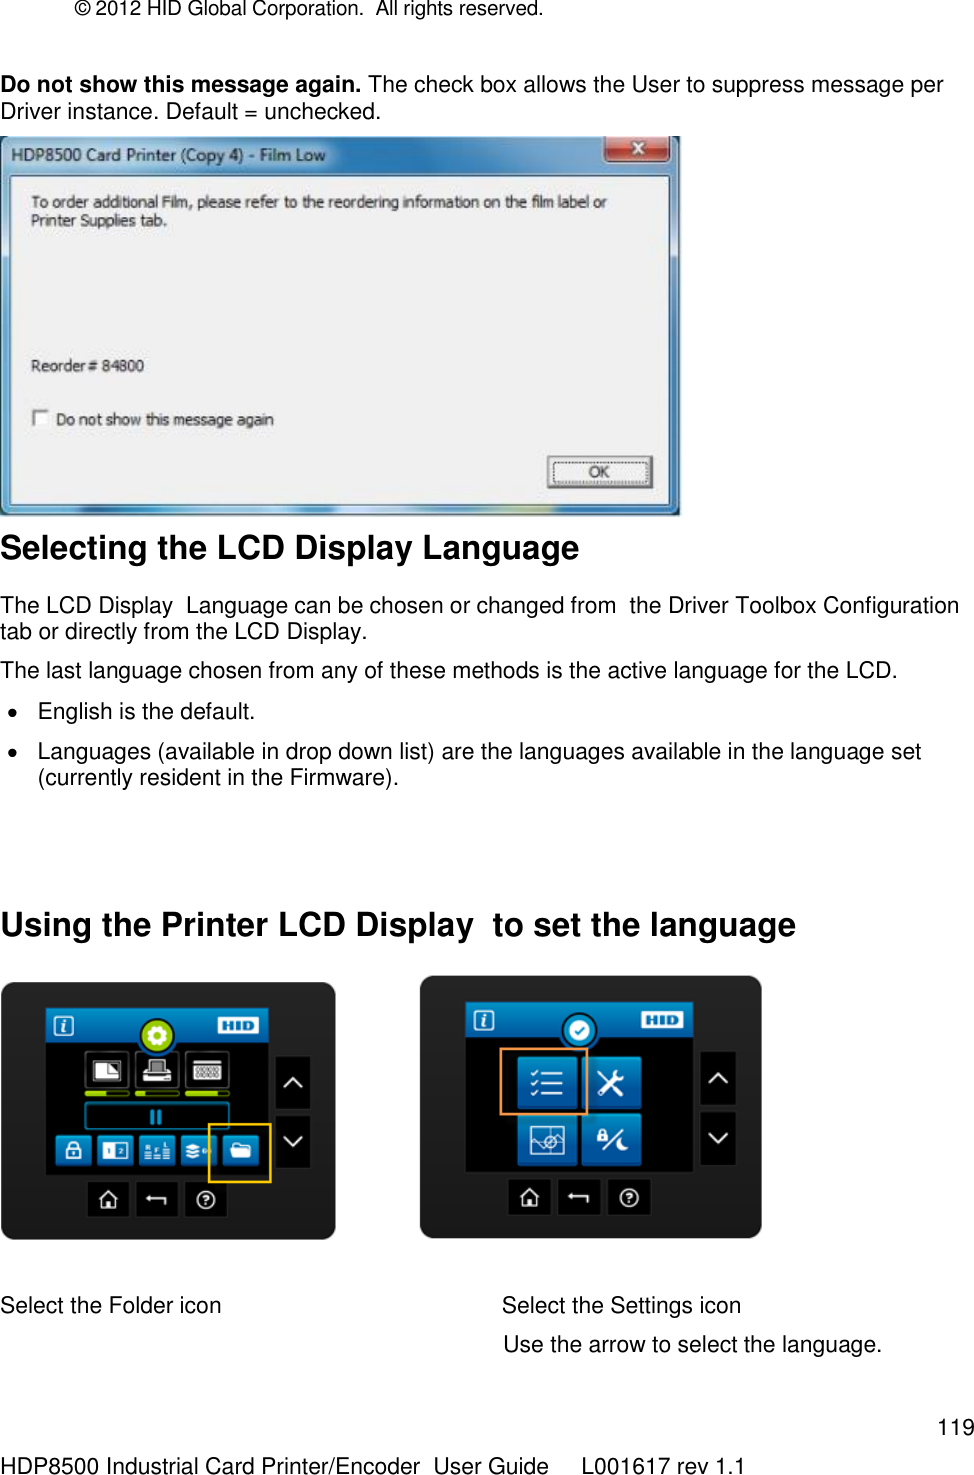 © 2012 HID Global Corporation.  All rights reserved.  119 HDP8500 Industrial Card Printer/Encoder  User Guide     L001617 rev 1.1 Do not show this message again. The check box allows the User to suppress message per Driver instance. Default = unchecked.  Selecting the LCD Display Language  The LCD Display  Language can be chosen or changed from  the Driver Toolbox Configuration tab or directly from the LCD Display.  The last language chosen from any of these methods is the active language for the LCD.   English is the default.   Languages (available in drop down list) are the languages available in the language set (currently resident in the Firmware).   Using the Printer LCD Display  to set the language               Select the Folder icon                                            Select the Settings icon                                                                                Use the arrow to select the language. 